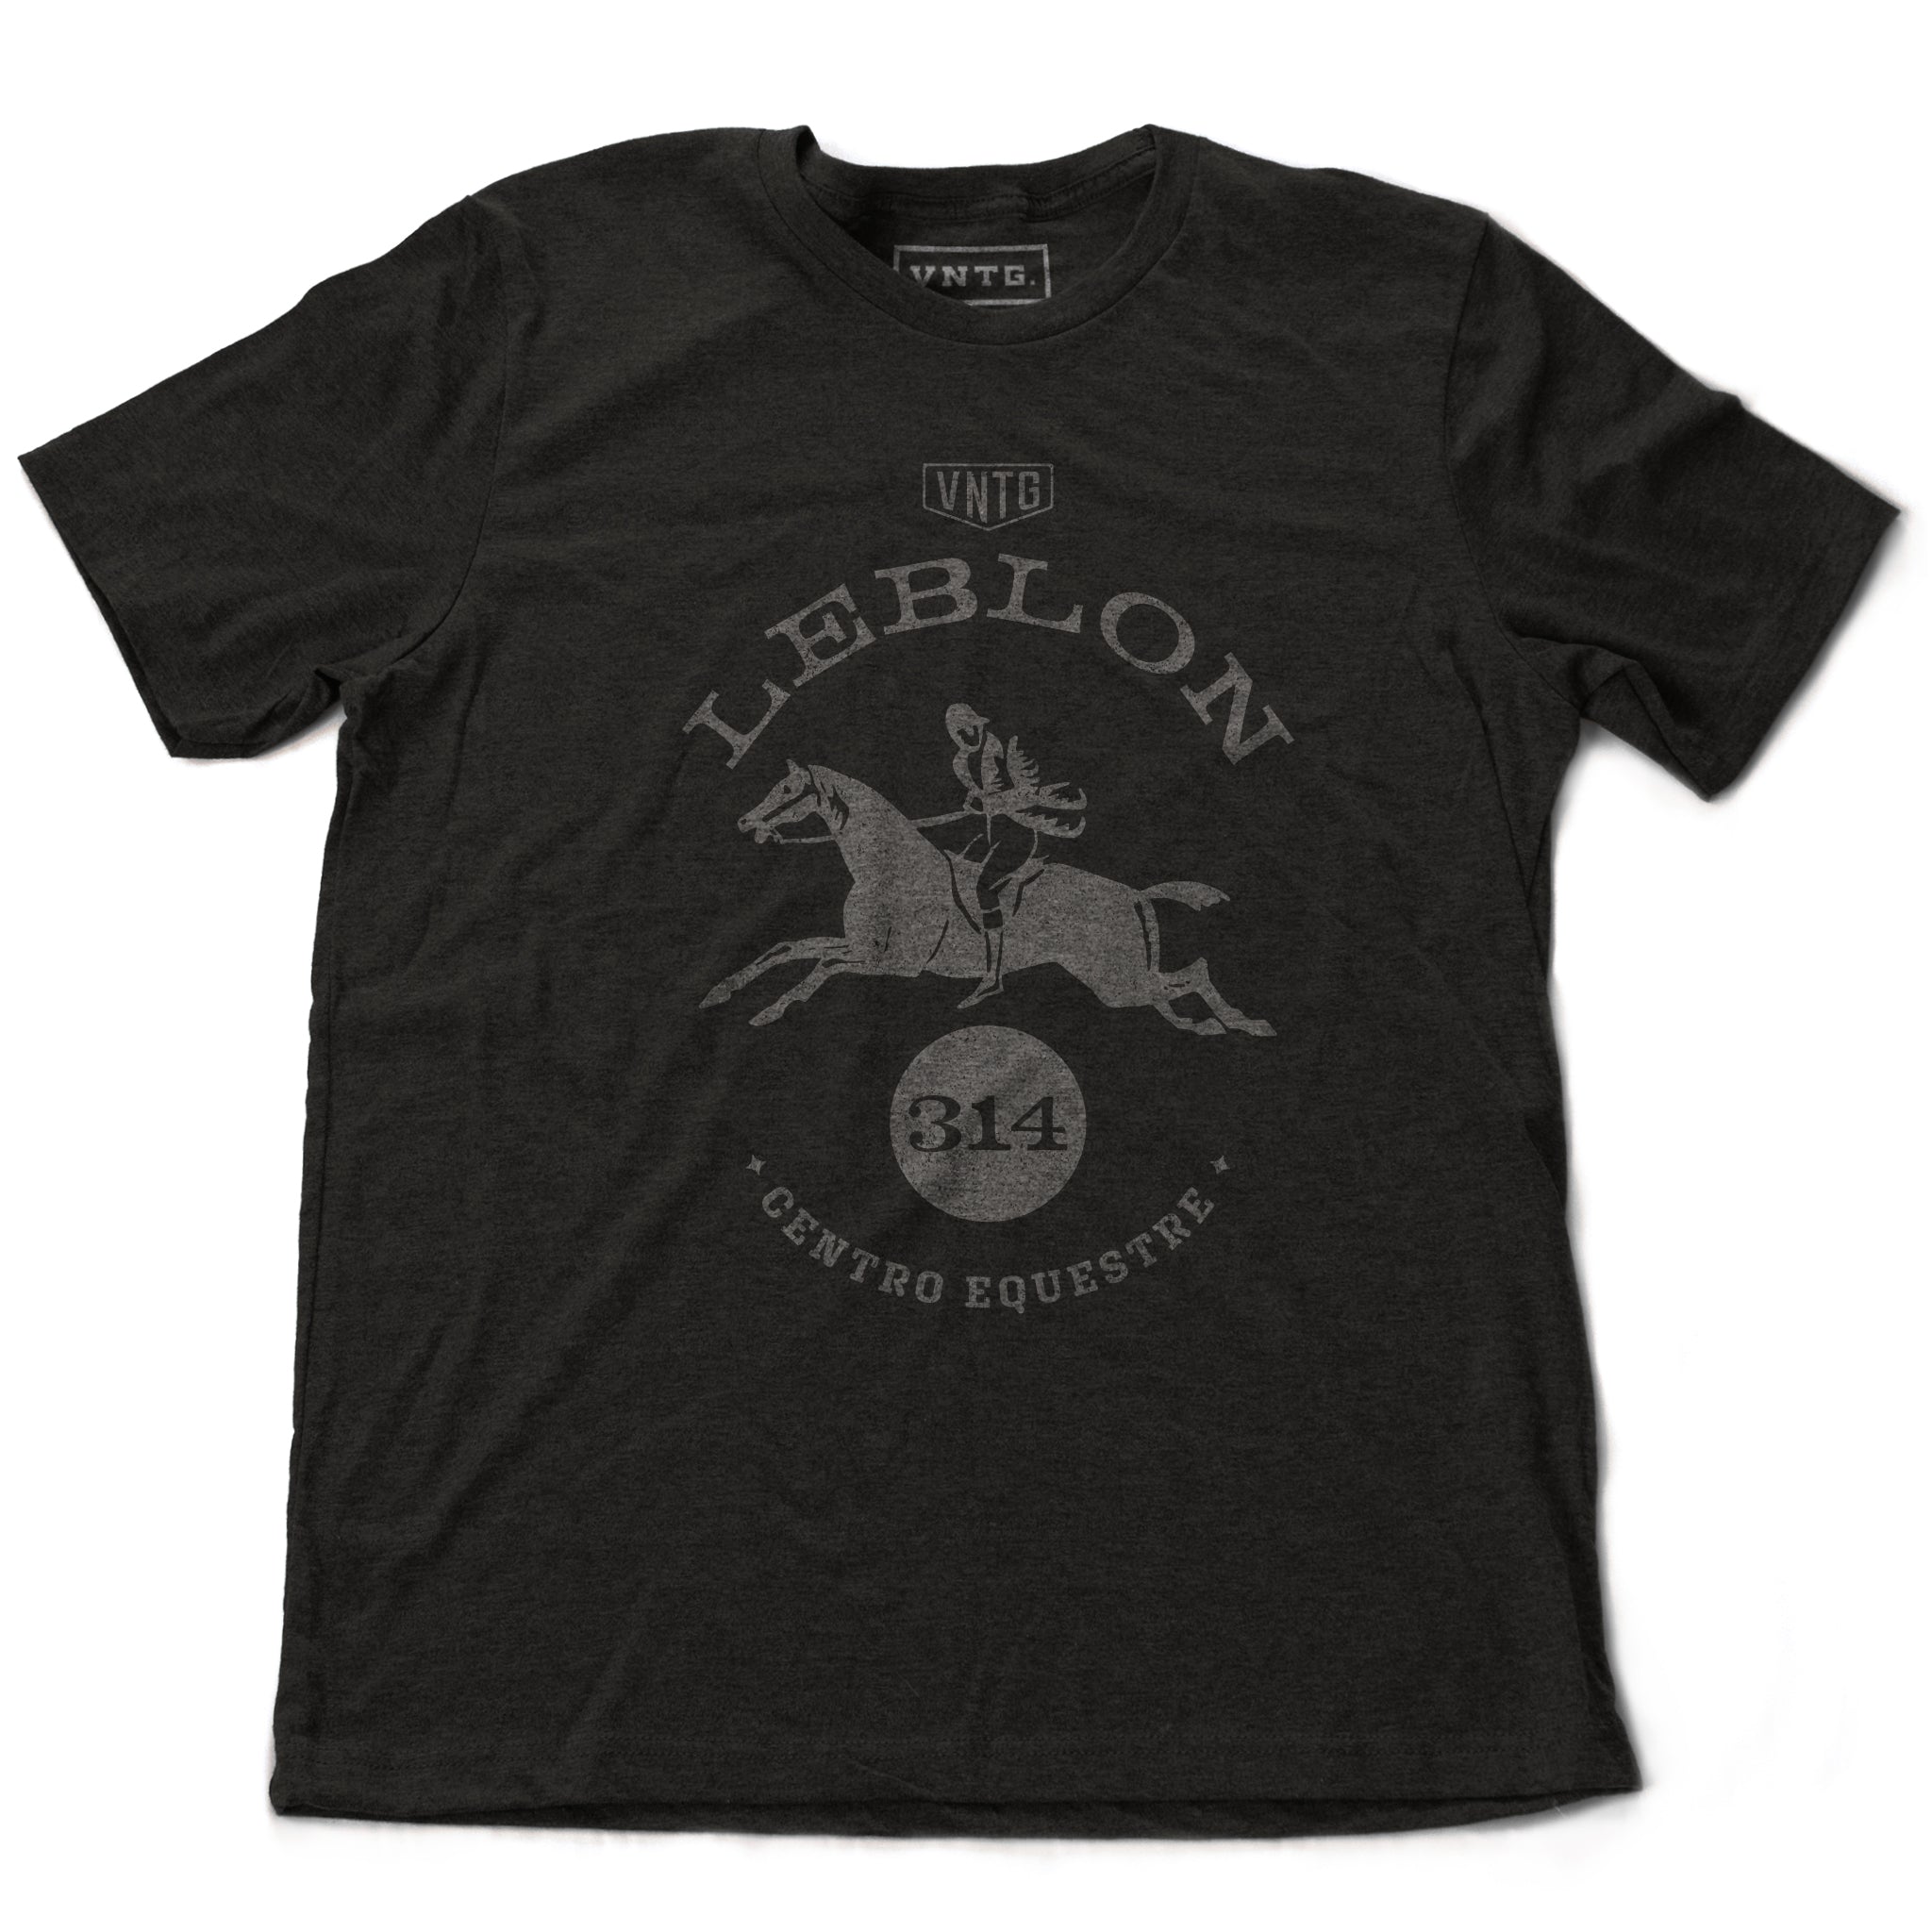 A preppy fashion retro, vintage-inspired t-shirt in Dark Gray Heather, featuring a leaping horse in dressage competition, surrounded by the words “Leblon Centro Equestre” (Leblon Equestrian Center) a fictitious horse training and competition facility in Rio de Janeiro, Brazil. By fashion brand VNTG., for wolfsaint.net